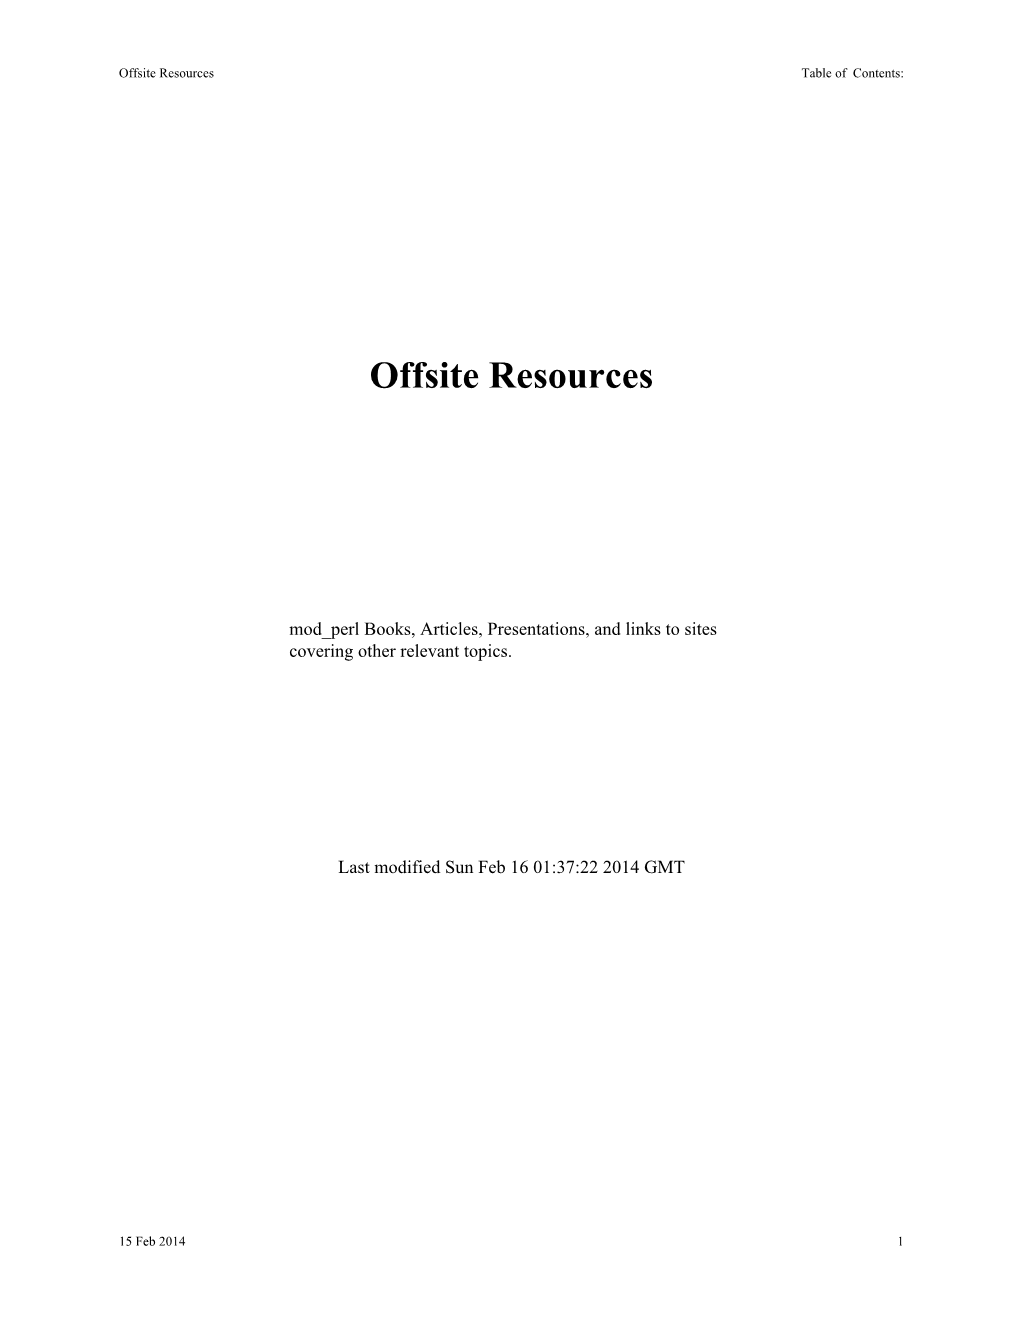 Offsite Resources Table of Contents